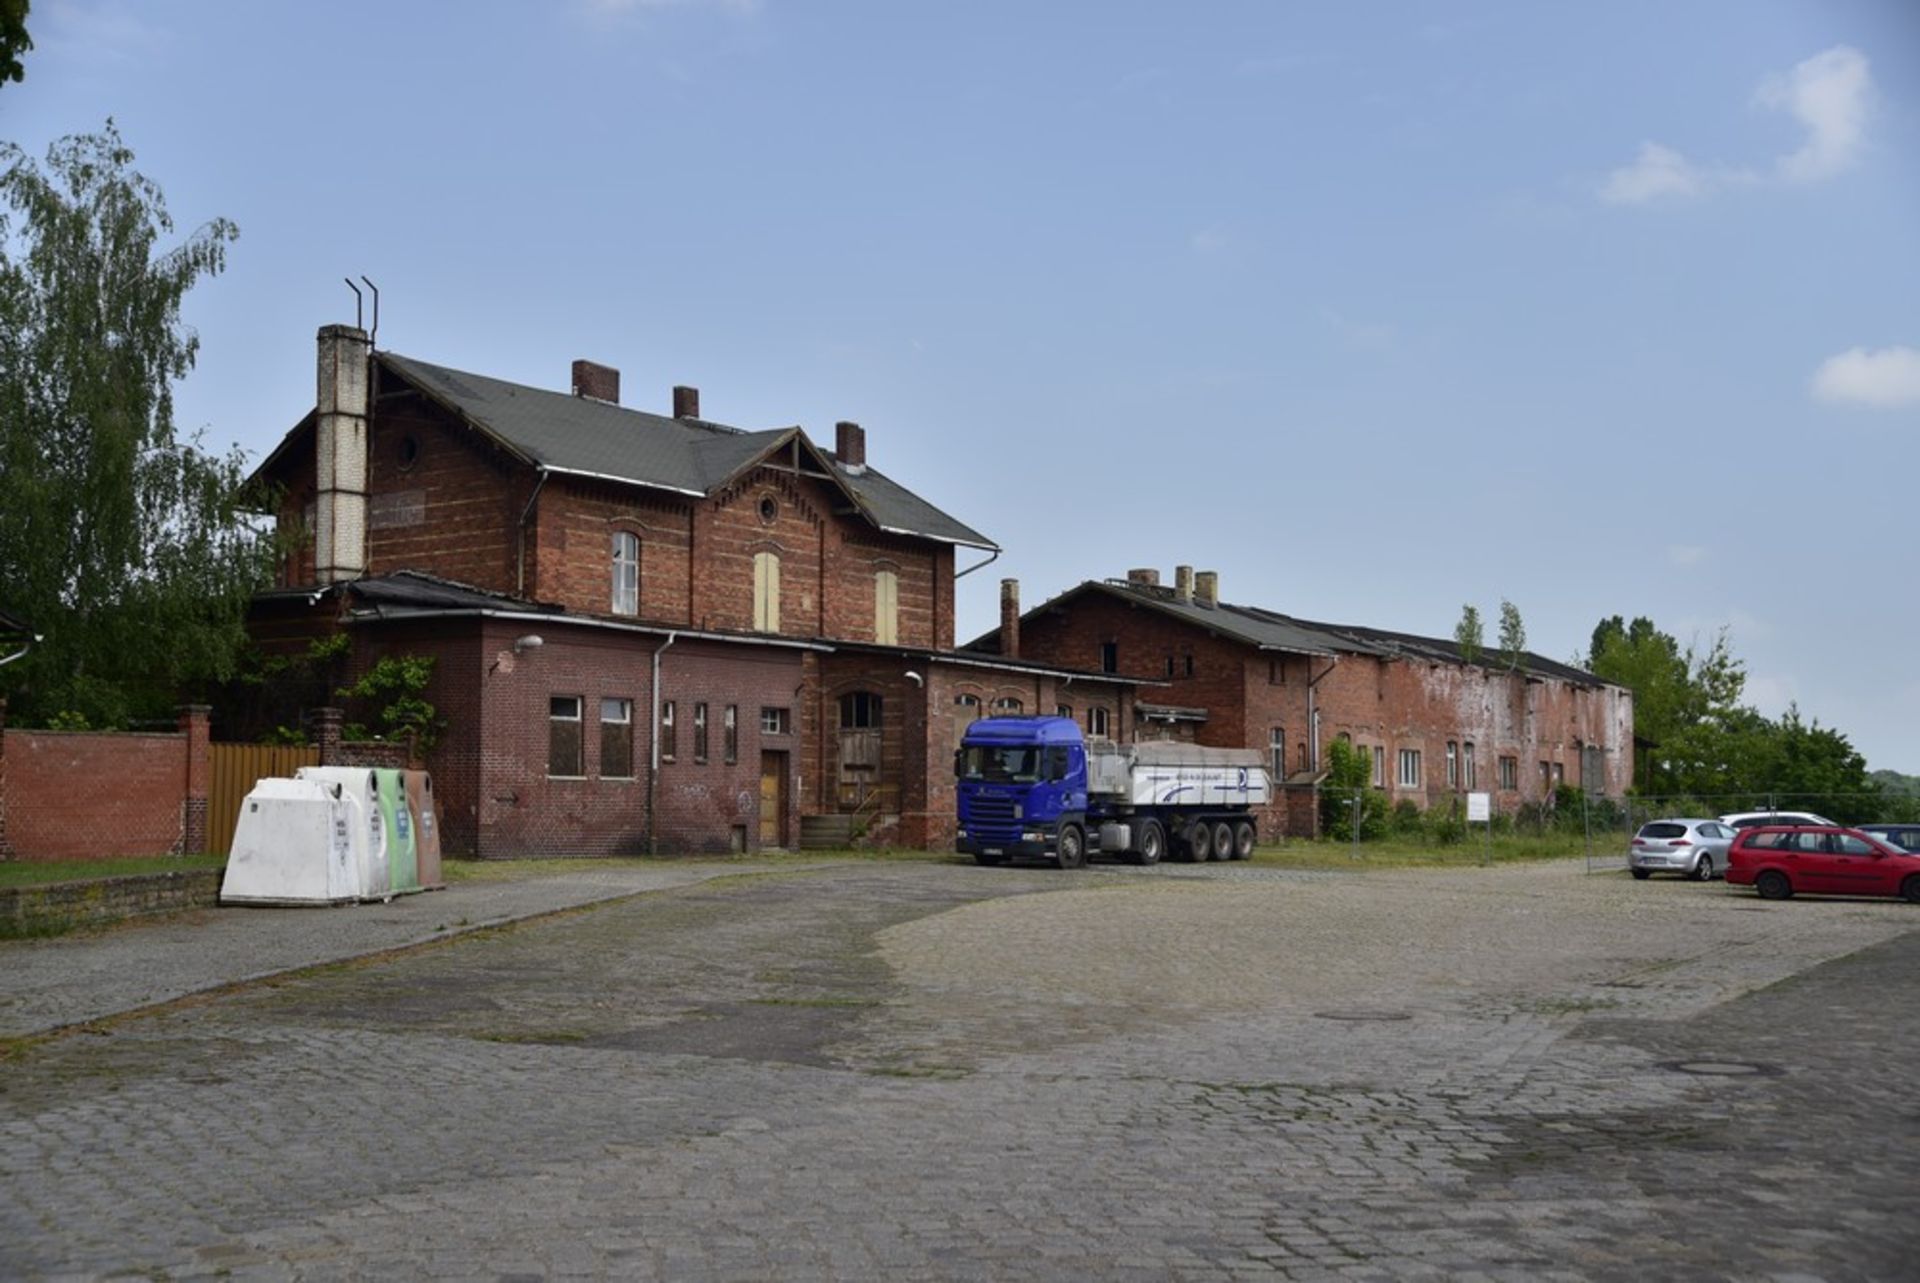 STATION HOUSE, GOODS SHED, OVER ONE ACRE Tangerhütte, Saxony, Germany, - Image 3 of 98